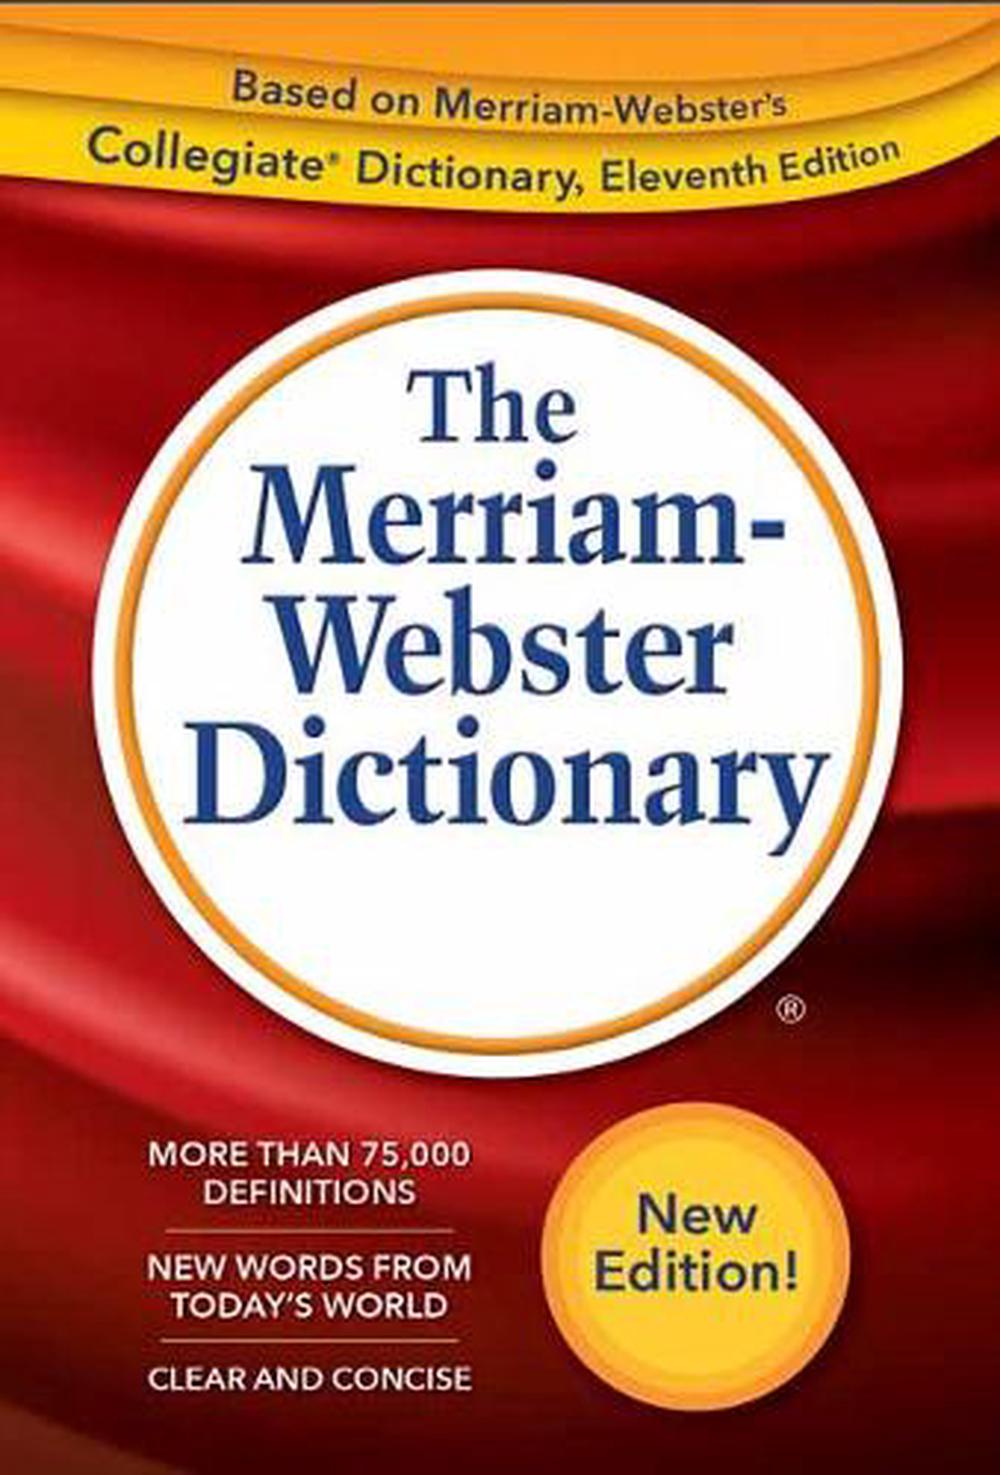 Merriamwebster Dictionary by Merriamwebster Free Shipping